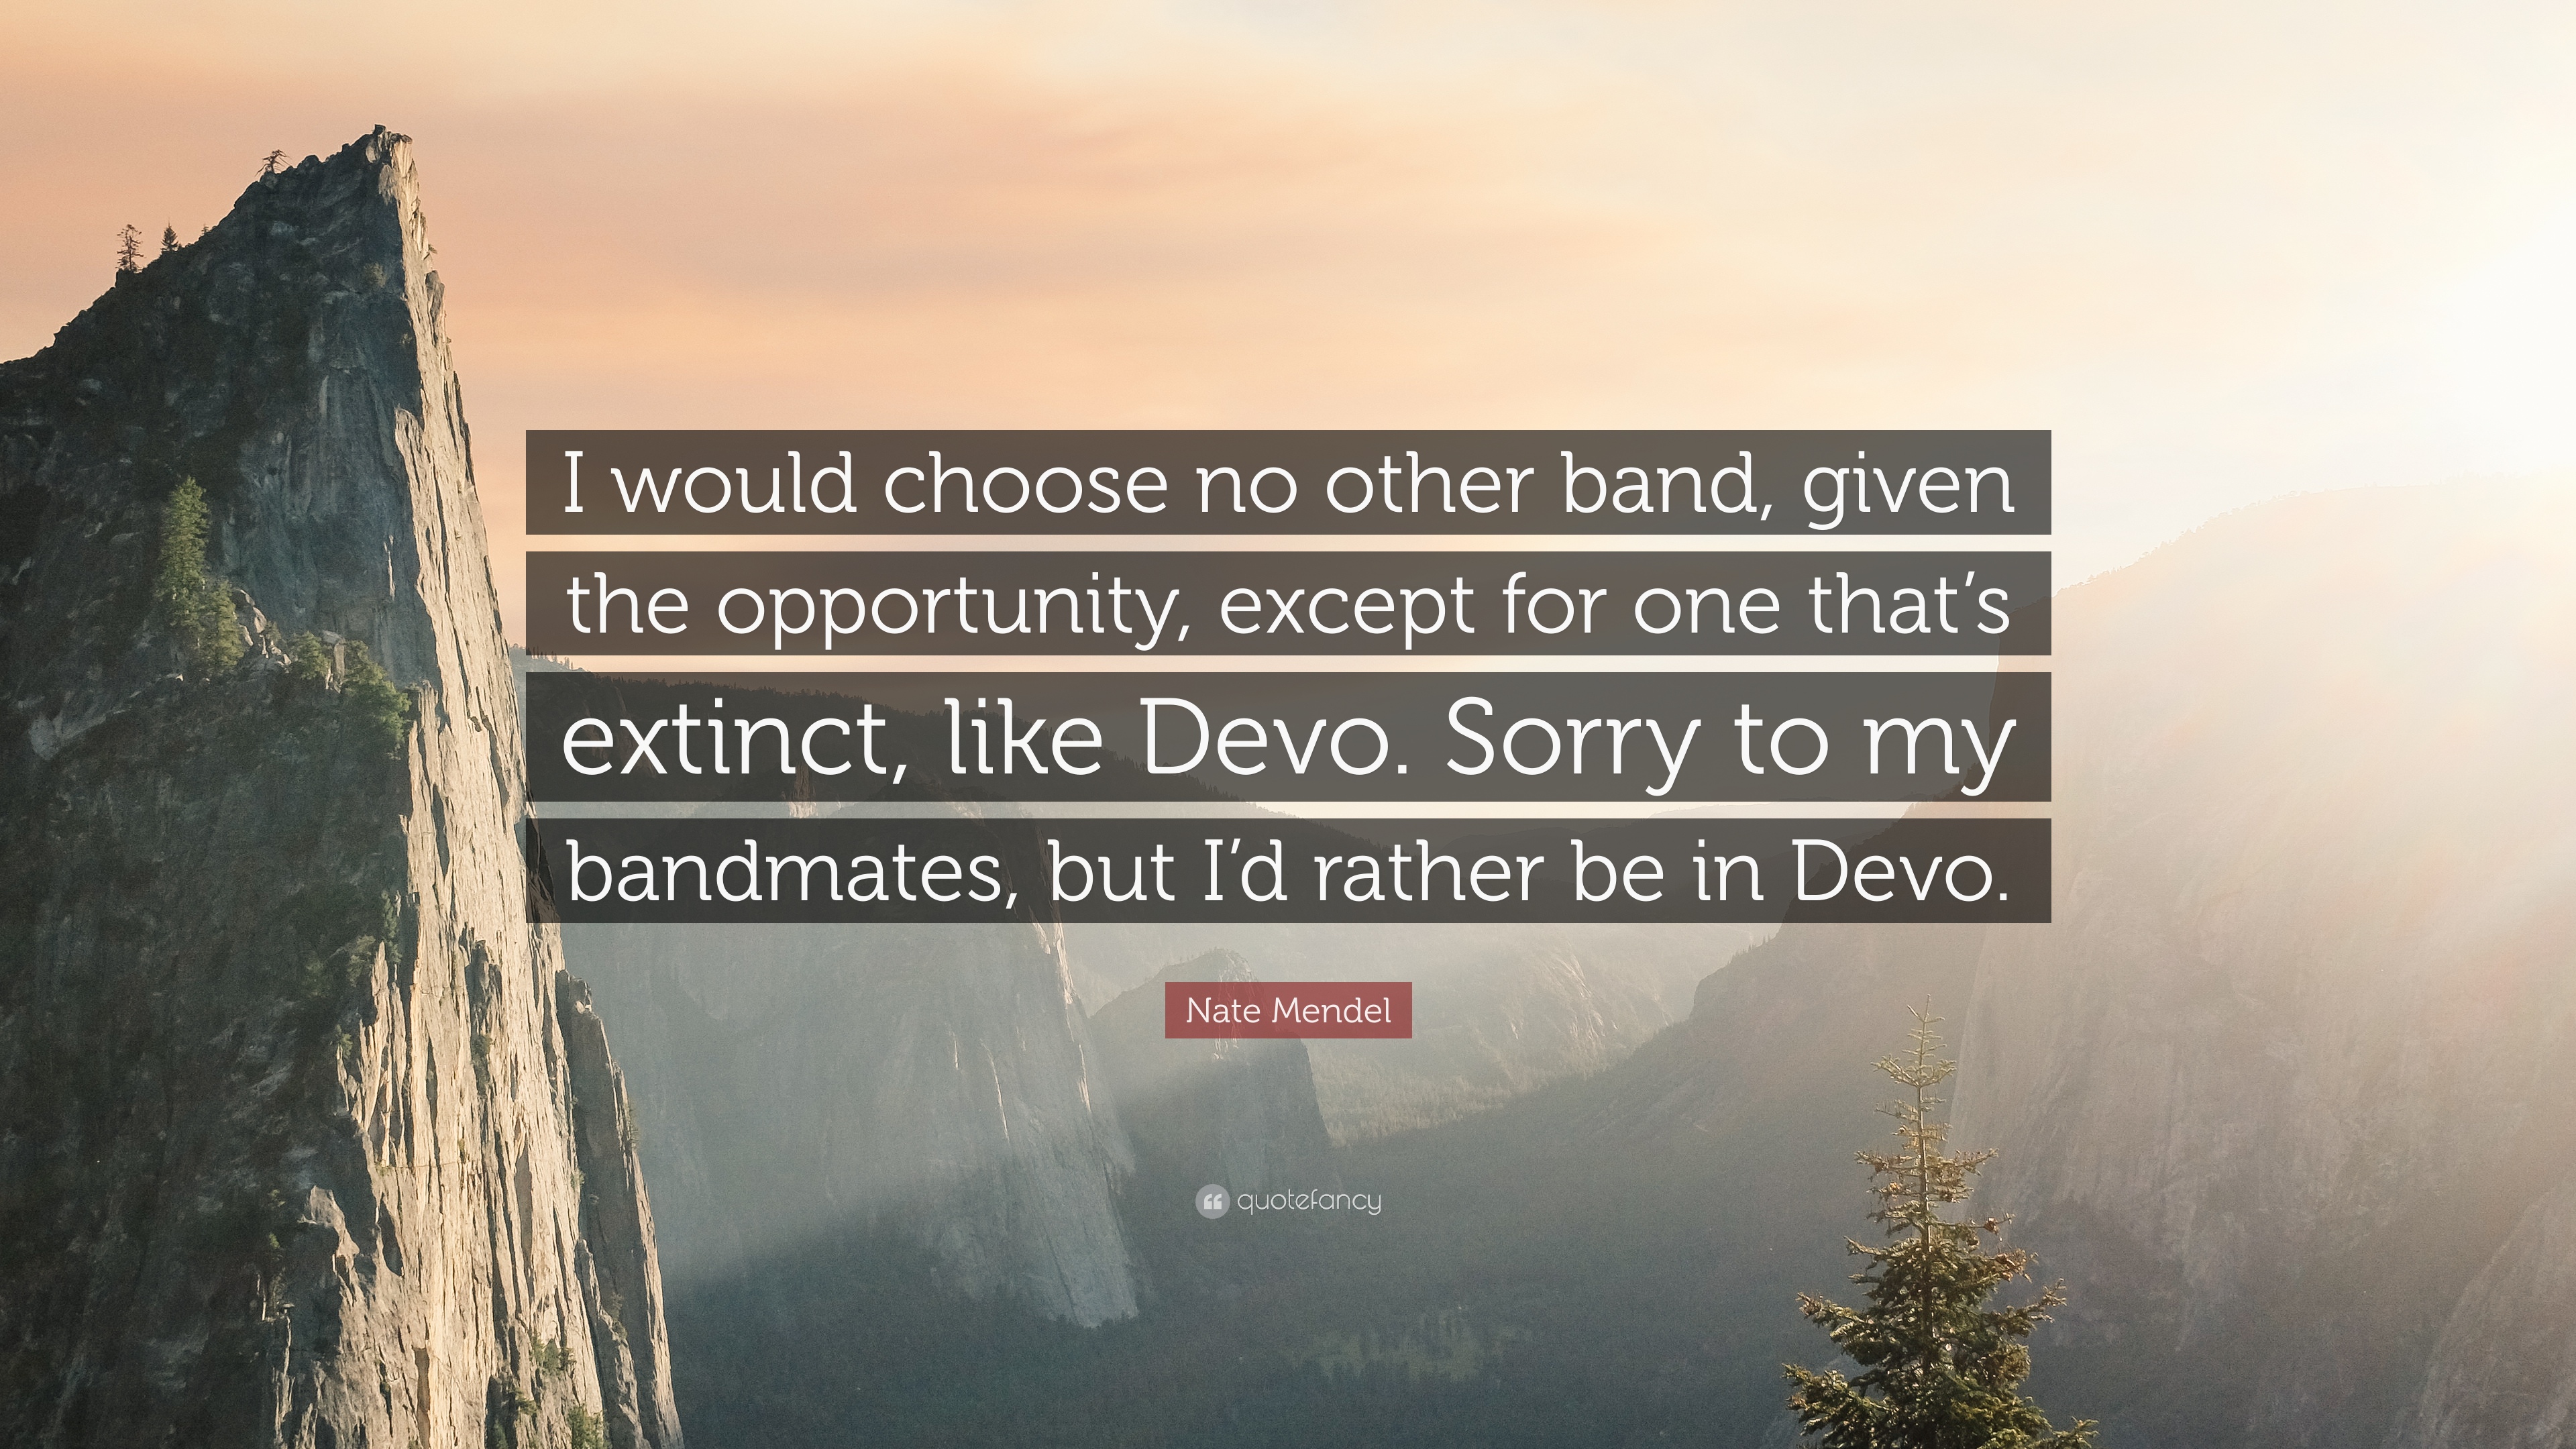 5 Quotes About Devo